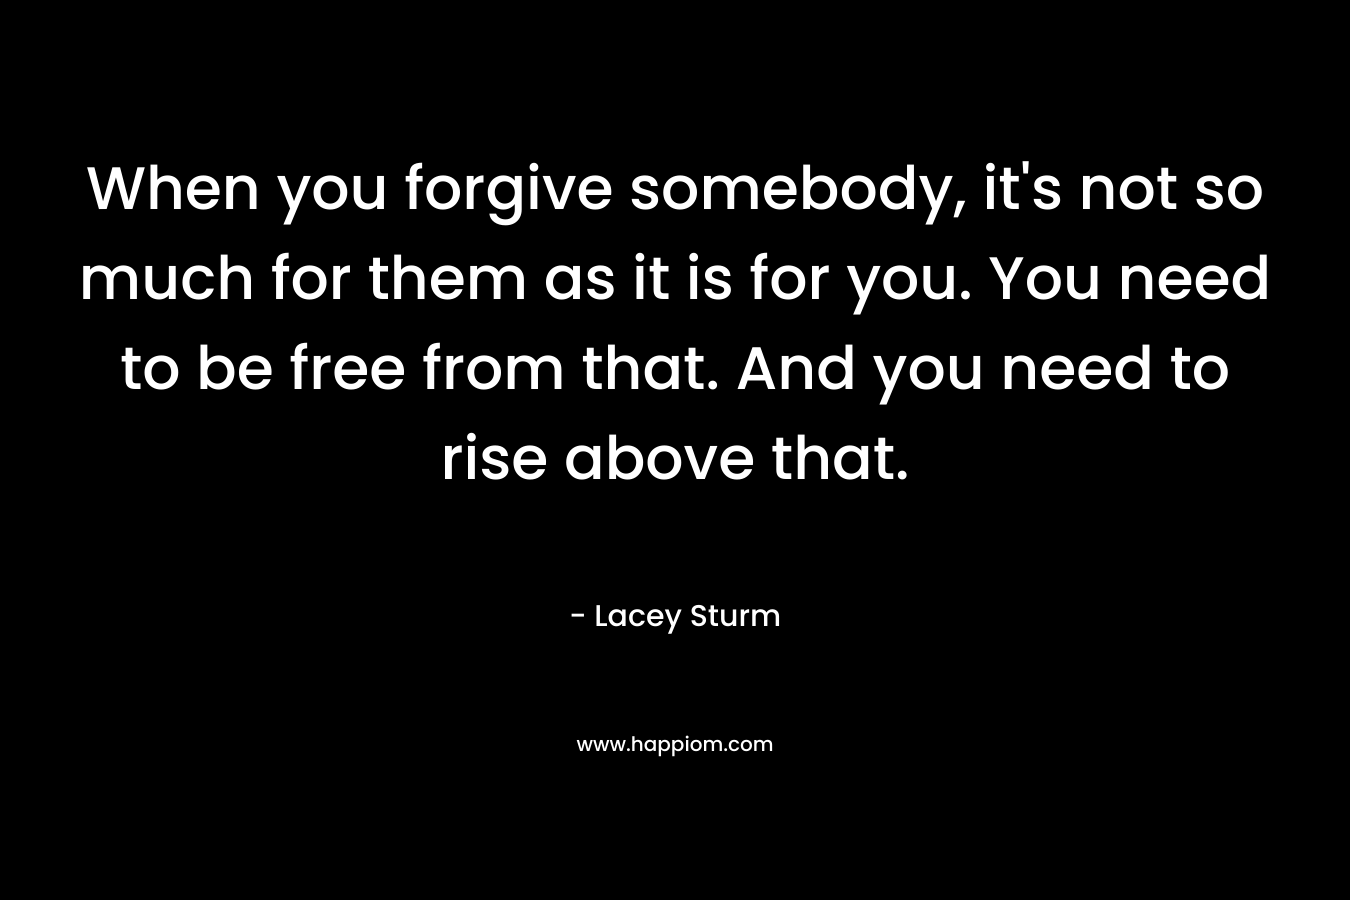 When you forgive somebody, it's not so much for them as it is for you. You need to be free from that. And you need to rise above that.